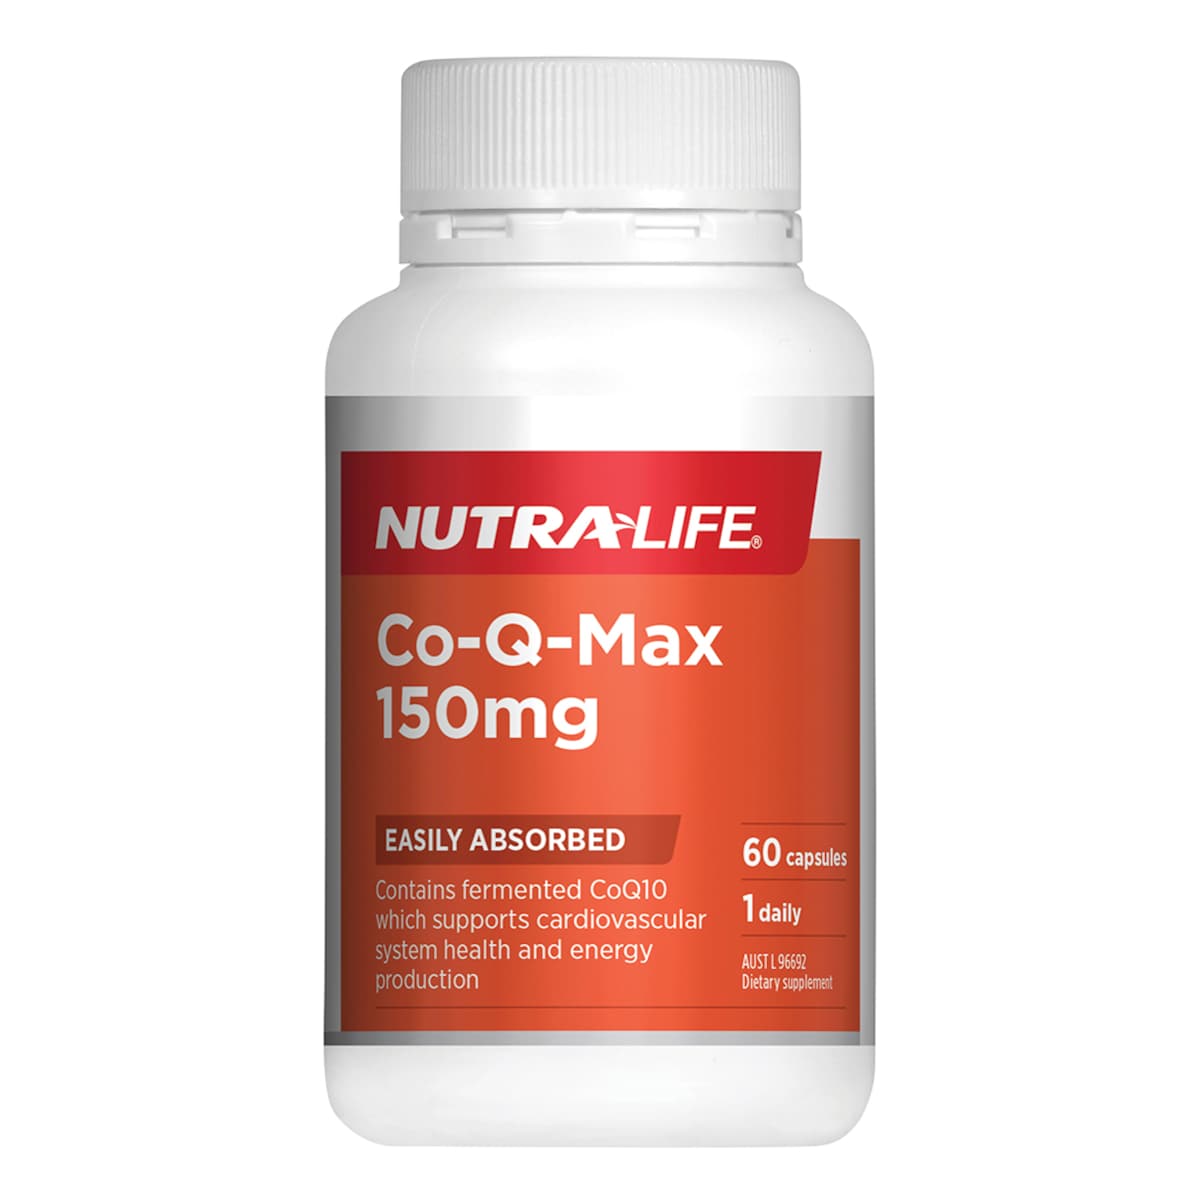 Nutra-Life Co-Q-Max 150mg 60 Capsules